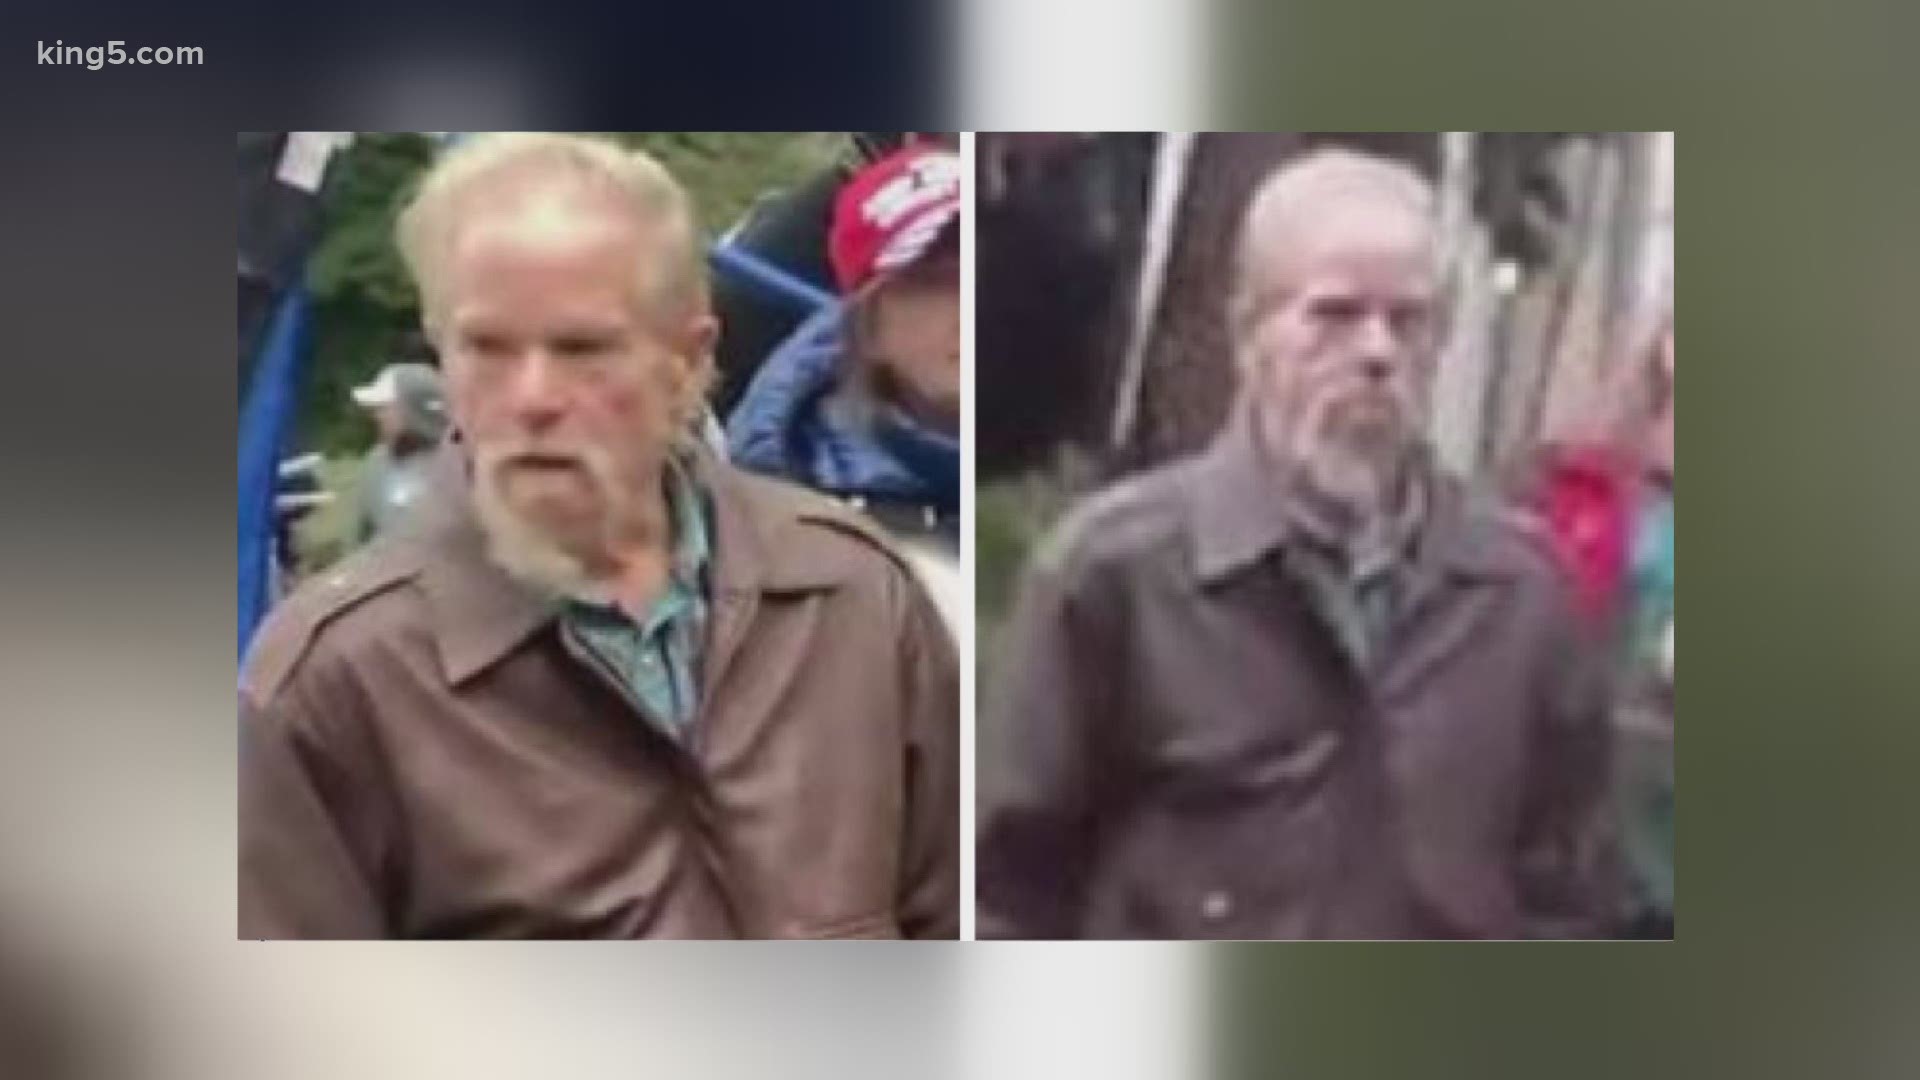 The Washington State Patrol is seeking to identify a man who is being investigated for assault in connection with the governor's mansion breach in Olympia on Jan. 6.